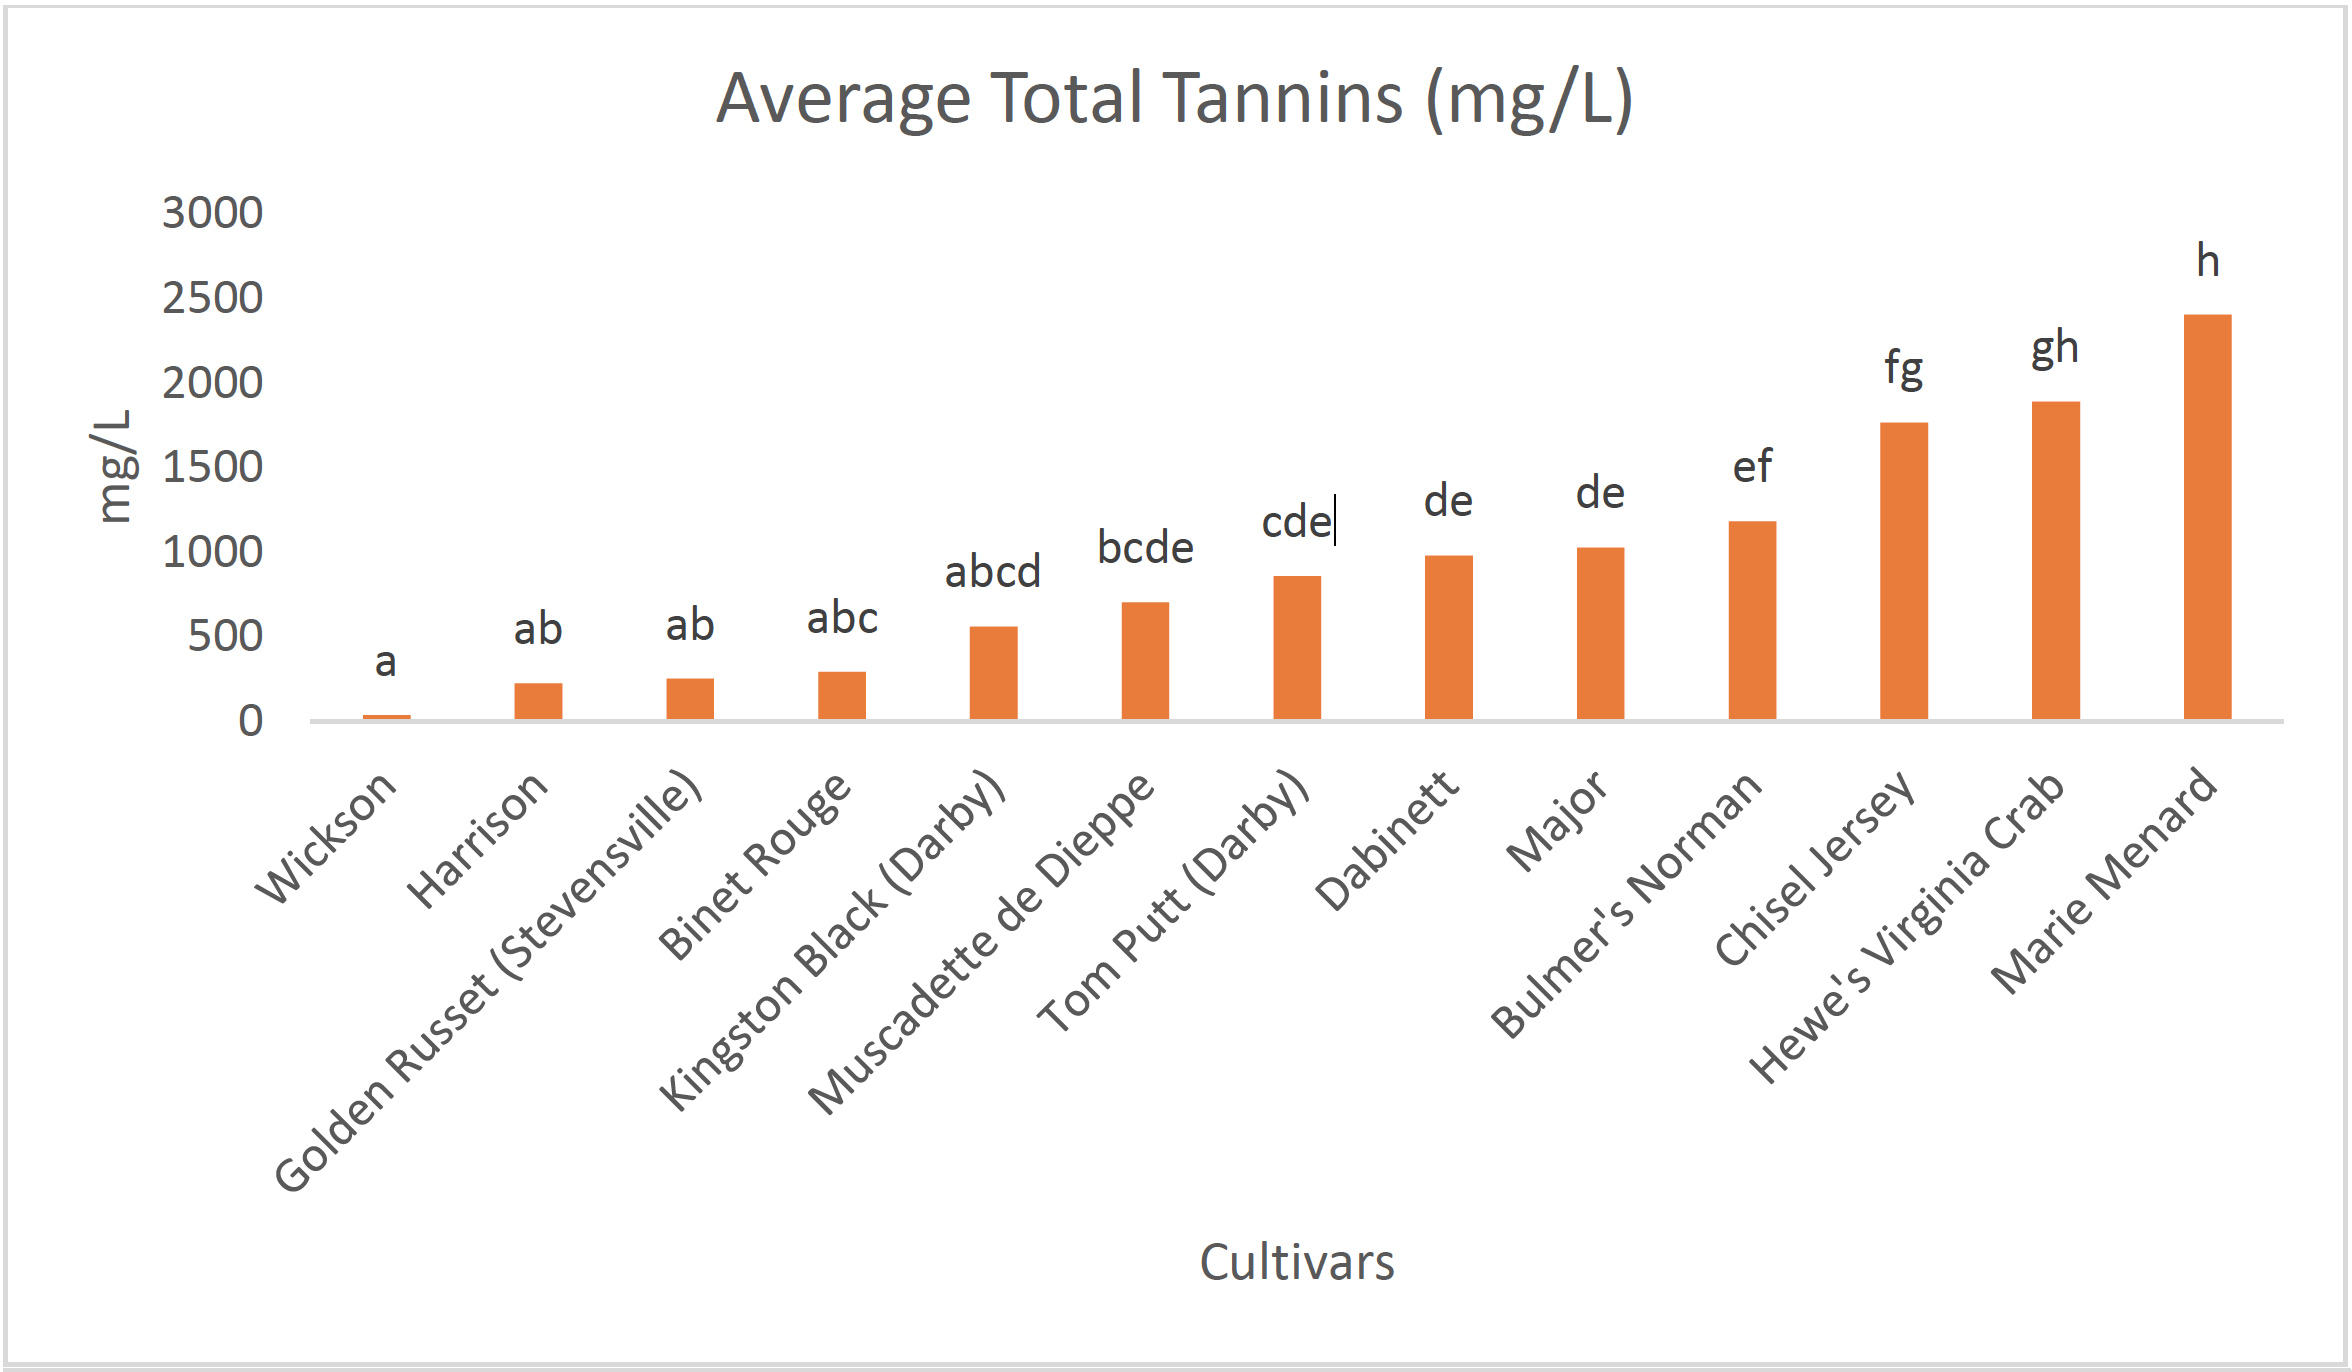 Column chart showing average total tannins (mg/L) for the cider cultivars. Values ranged from Marie Menard, with the highest tannin content at between 2000 and 2500, and Wickson, with the lowest tannin content at slightly higher than zero.